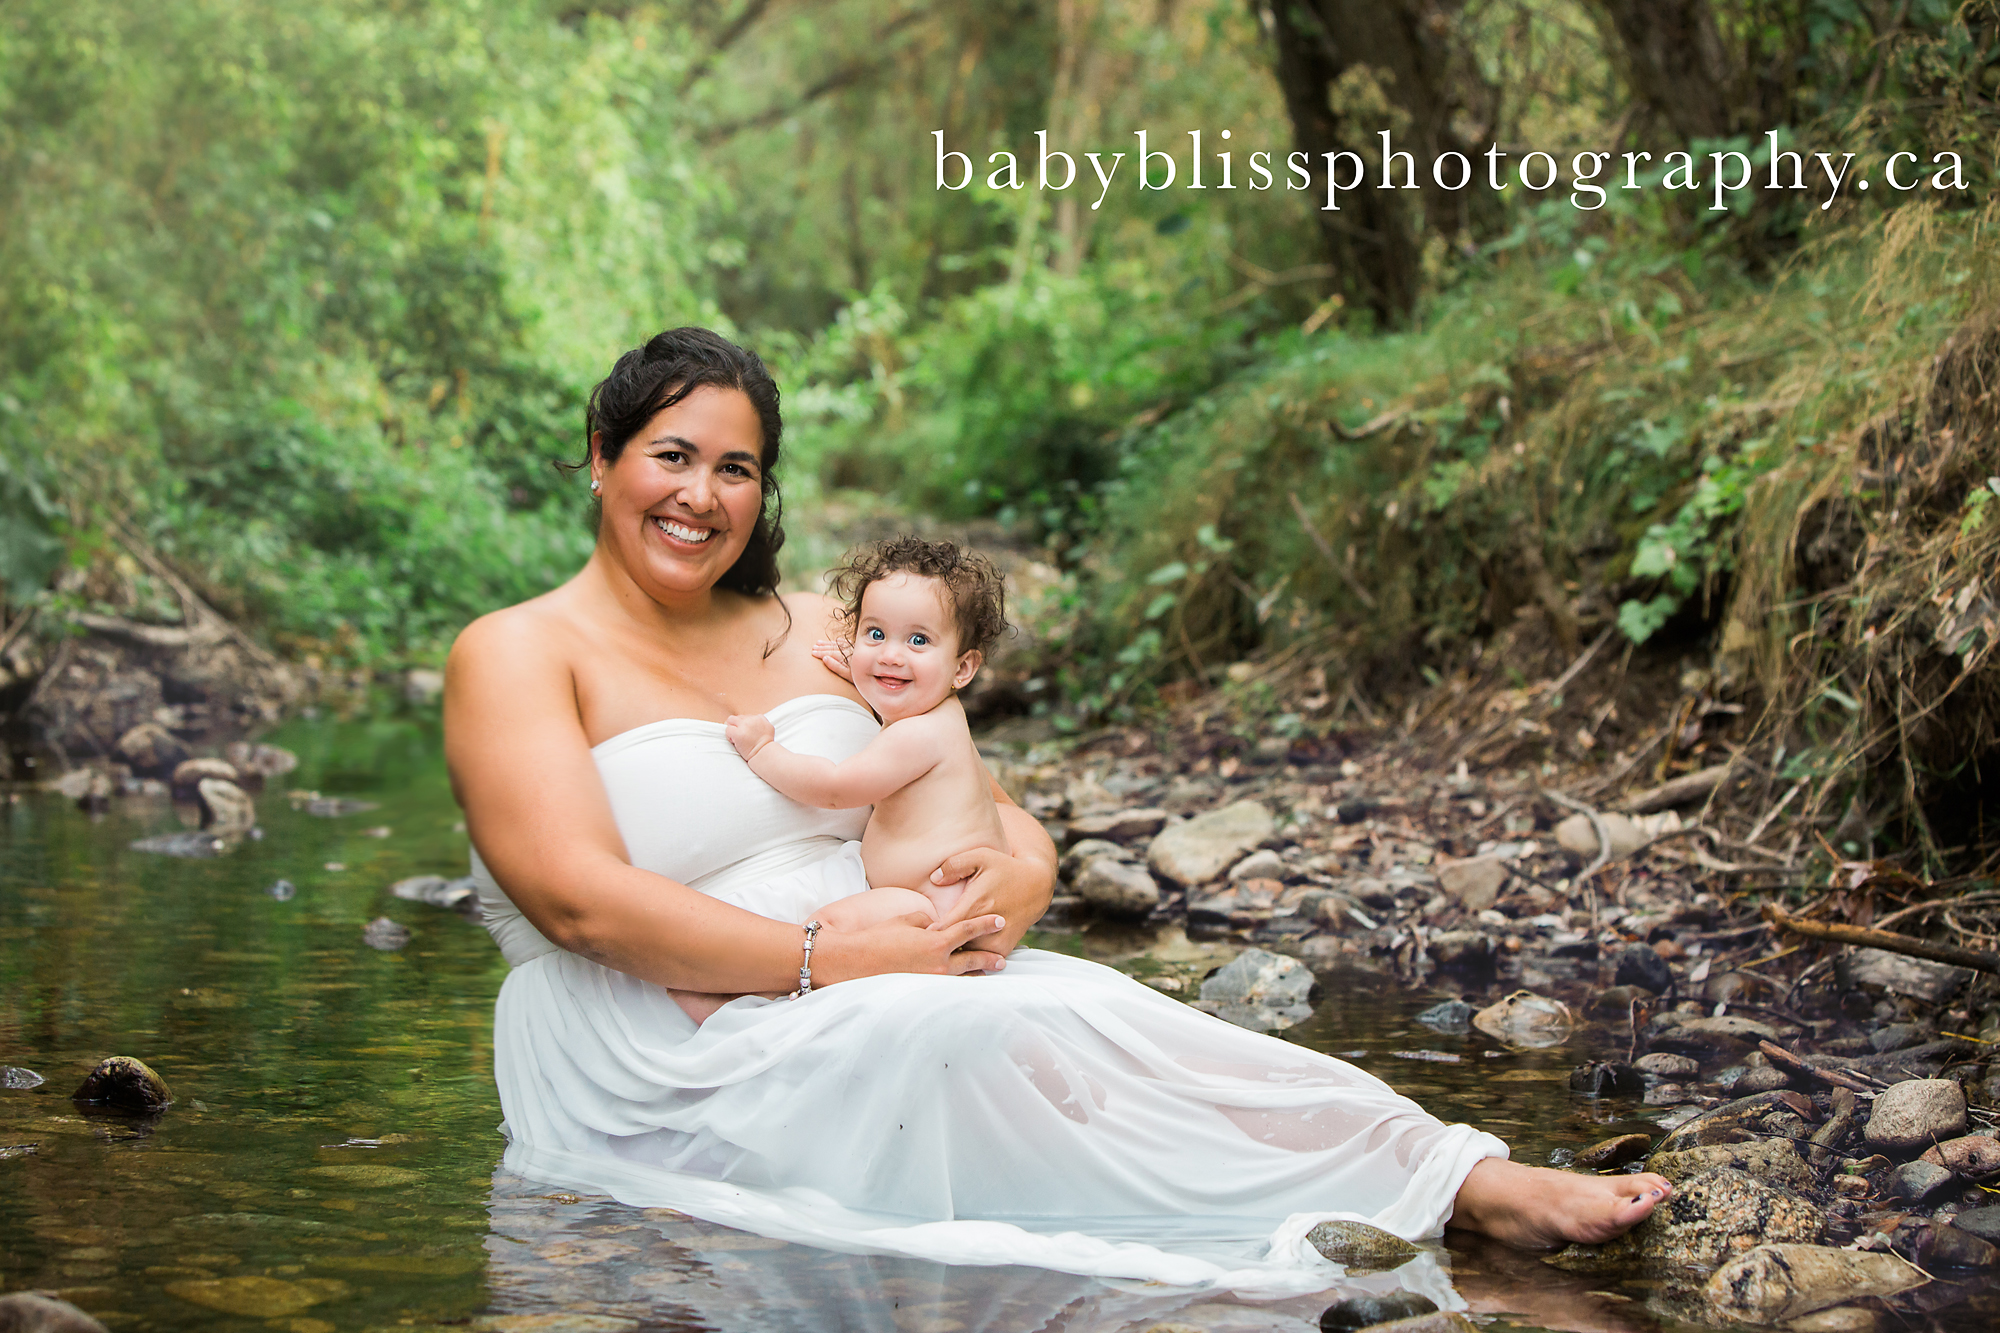 Baby Photographer in Vernon | Baby Bliss Photography | www.babyblissphotography.com